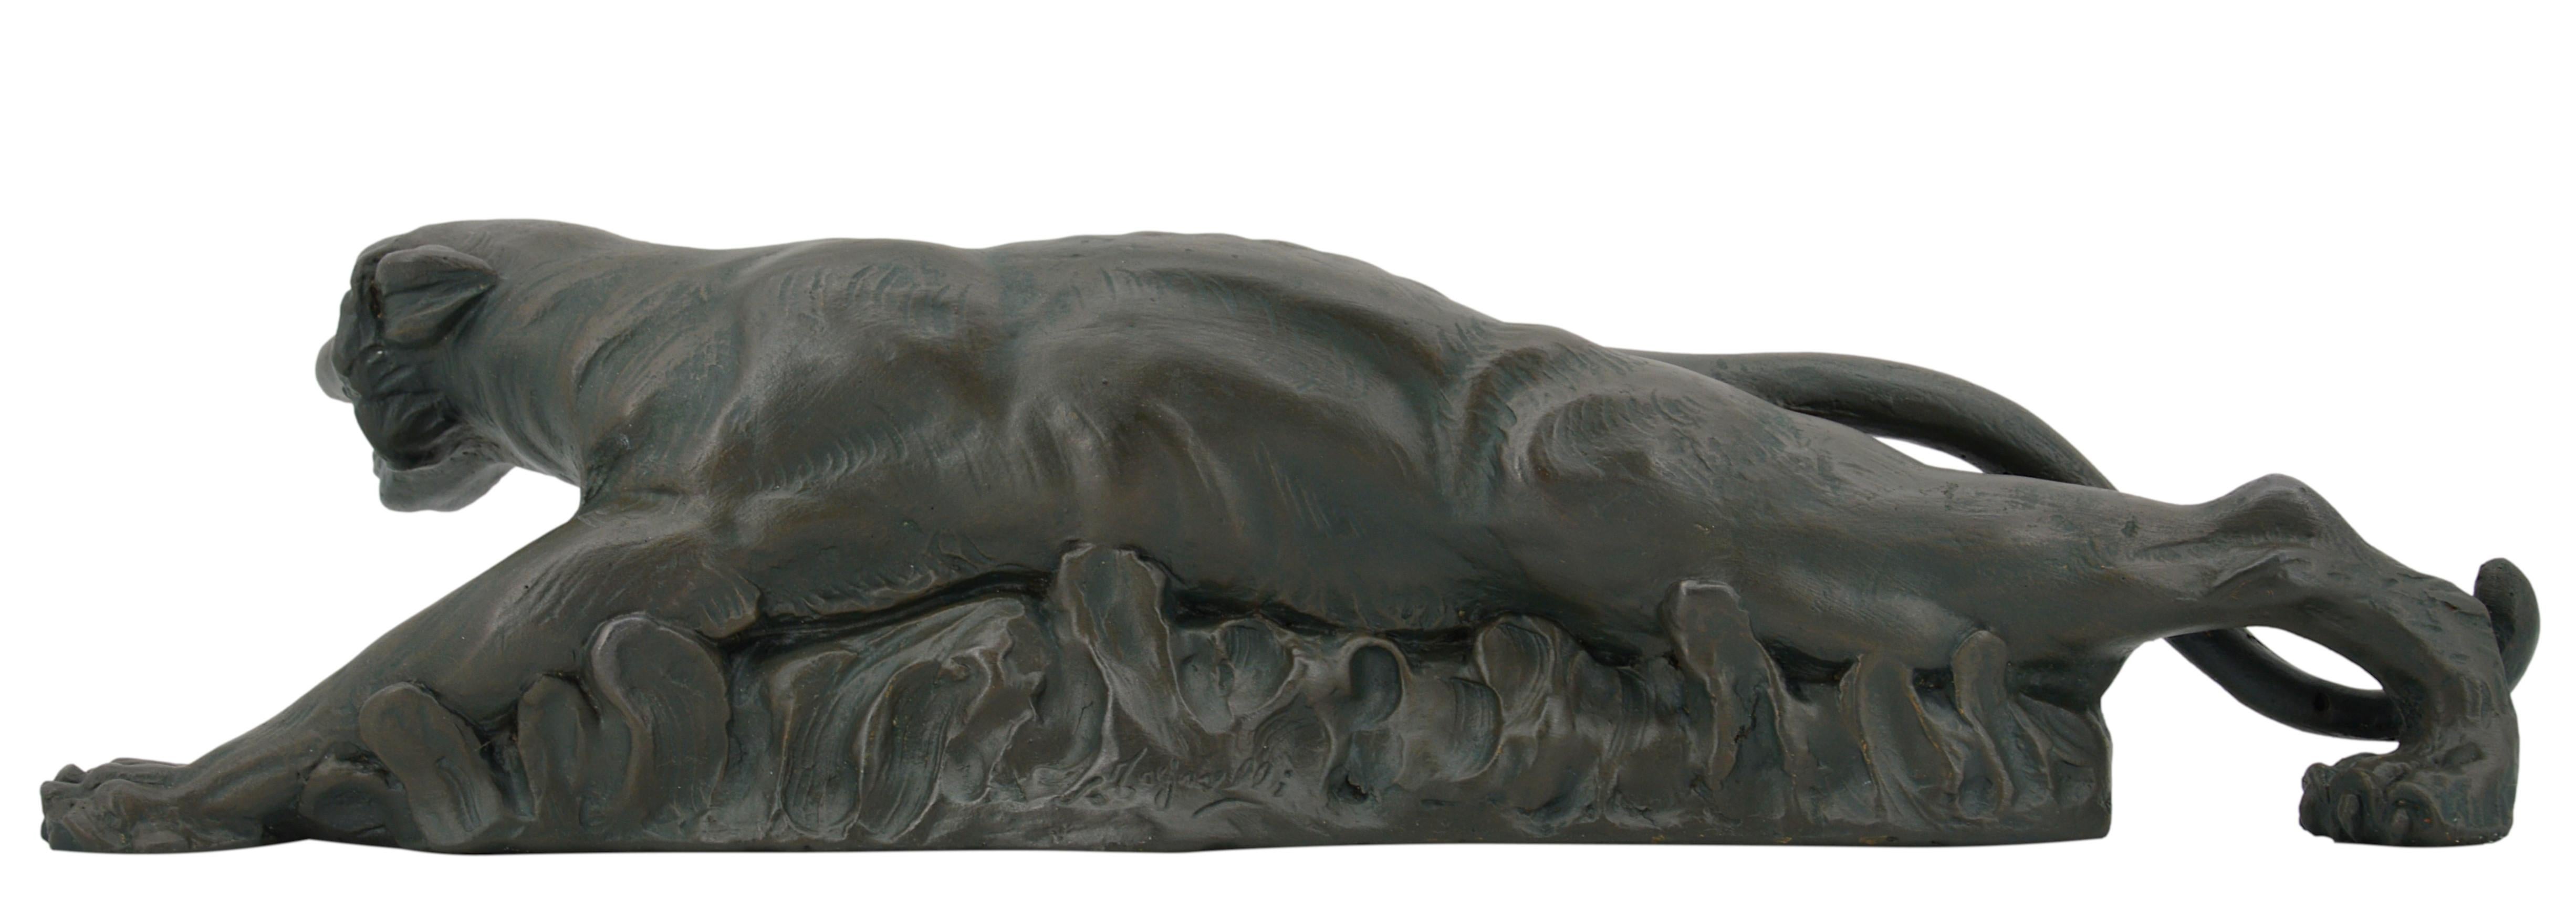 Plaster French Art Deco Tiger on the Prowl Sculpture, 1930s For Sale